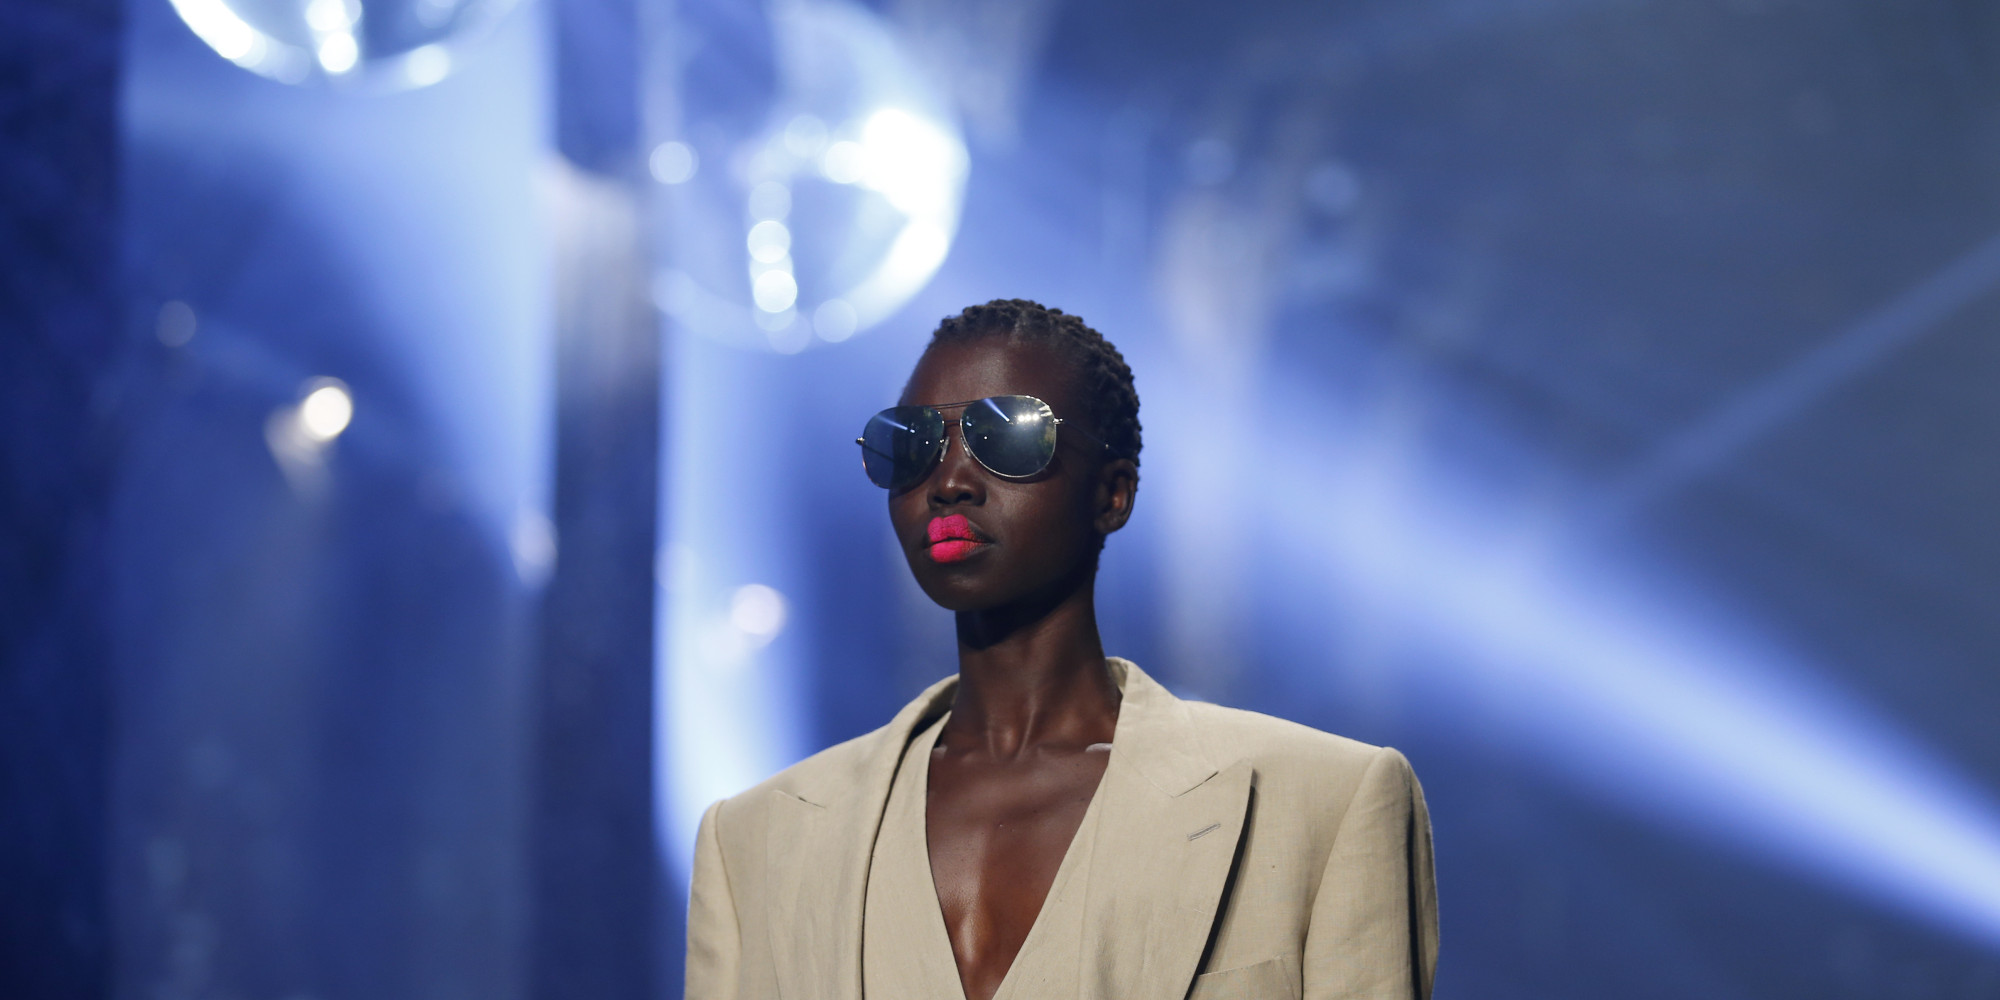 Model Nykhor Paul Speaks Out About Fashion's Problem With Black Beauty ...